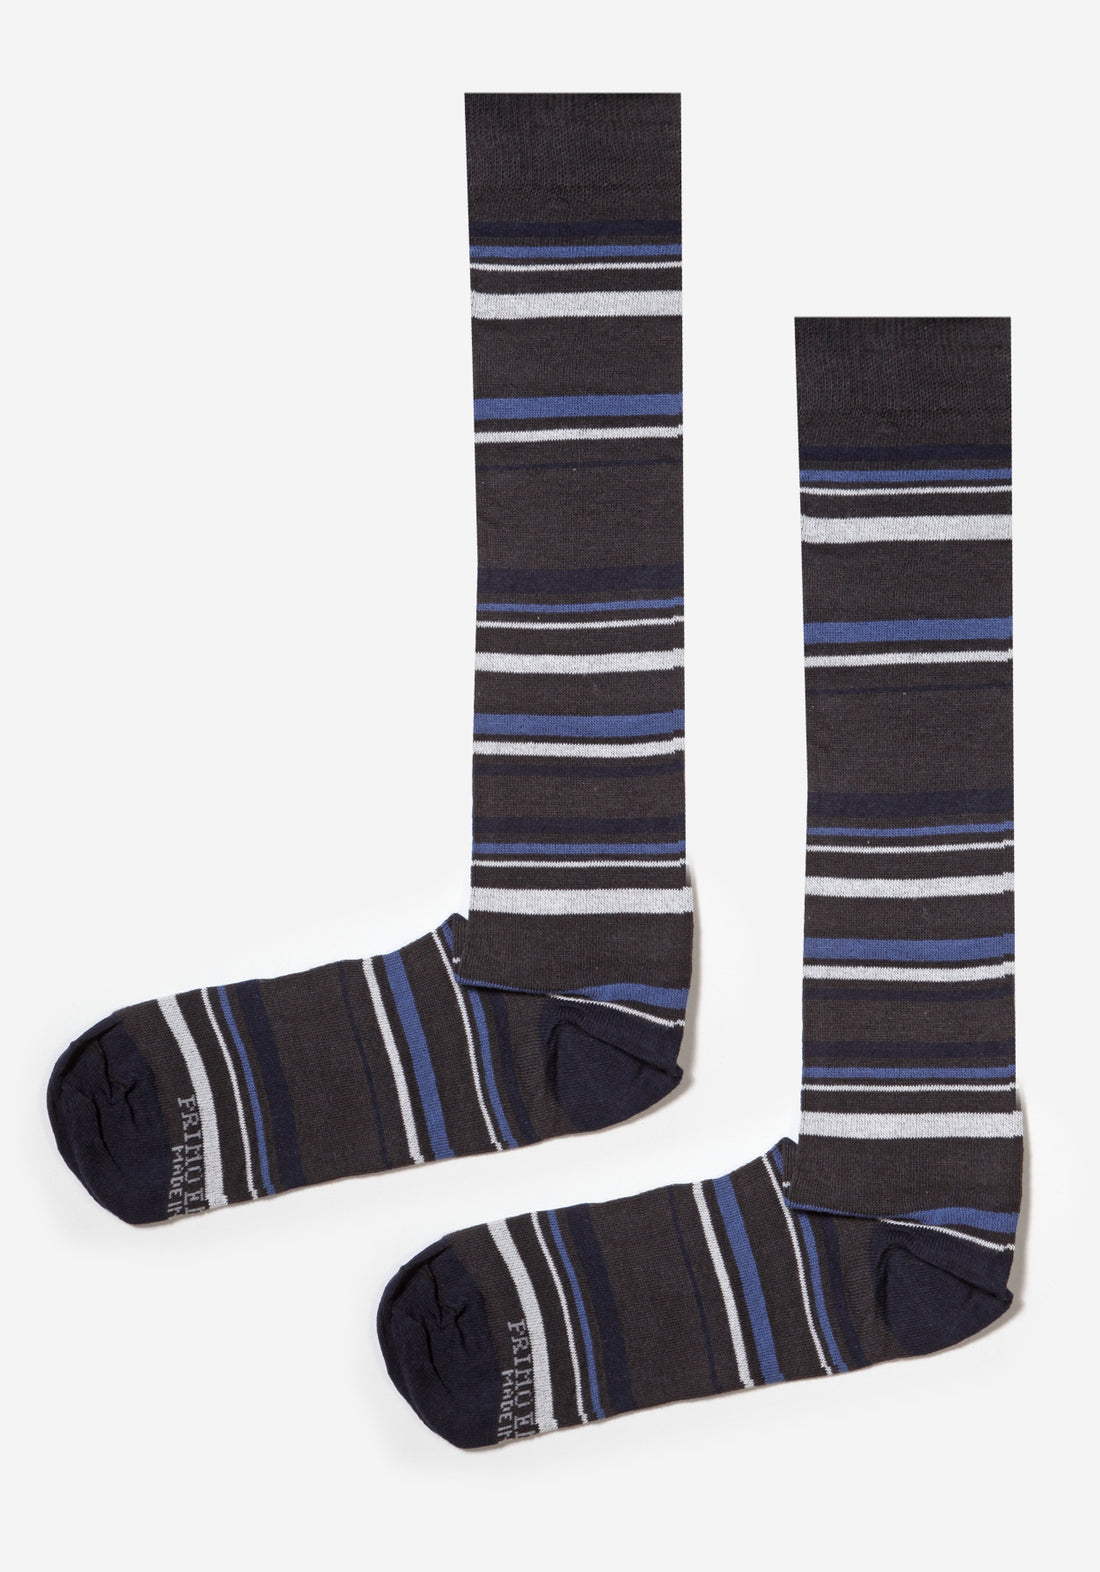 Trio of Long Cotton Socks in Various Patterns